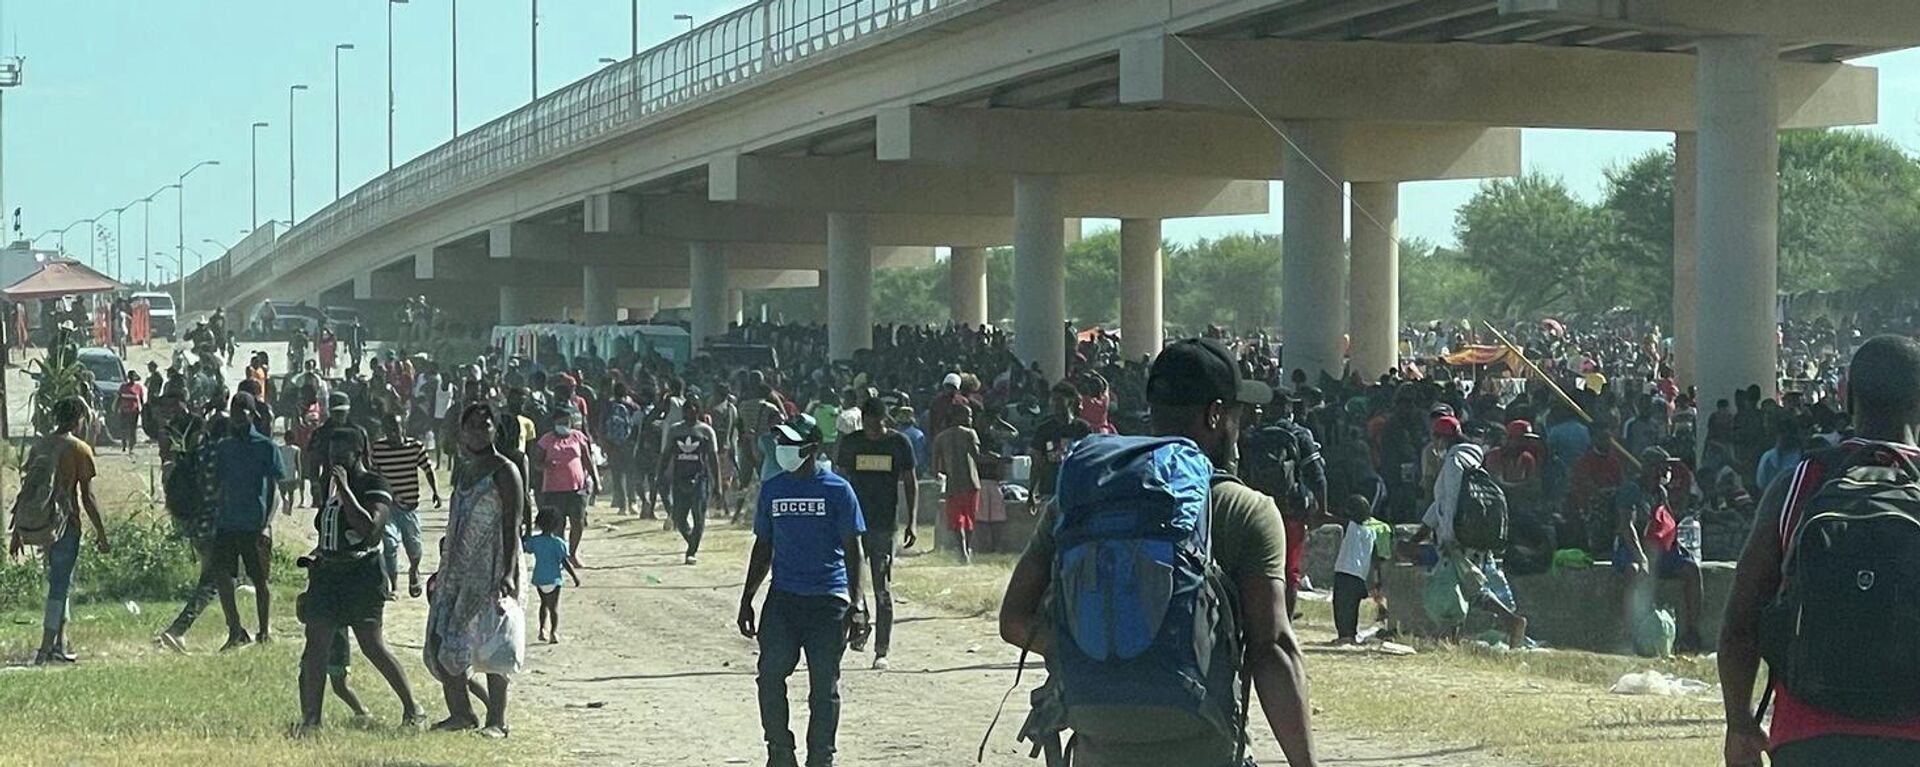 Migrants are seen by the International Bridge between Mexico and the U.S., in Del Rio, Texas, U.S., September 16, 2021, in this picture obtained from social media. Picture taken September 16, 2021 - Sputnik International, 1920, 17.09.2021